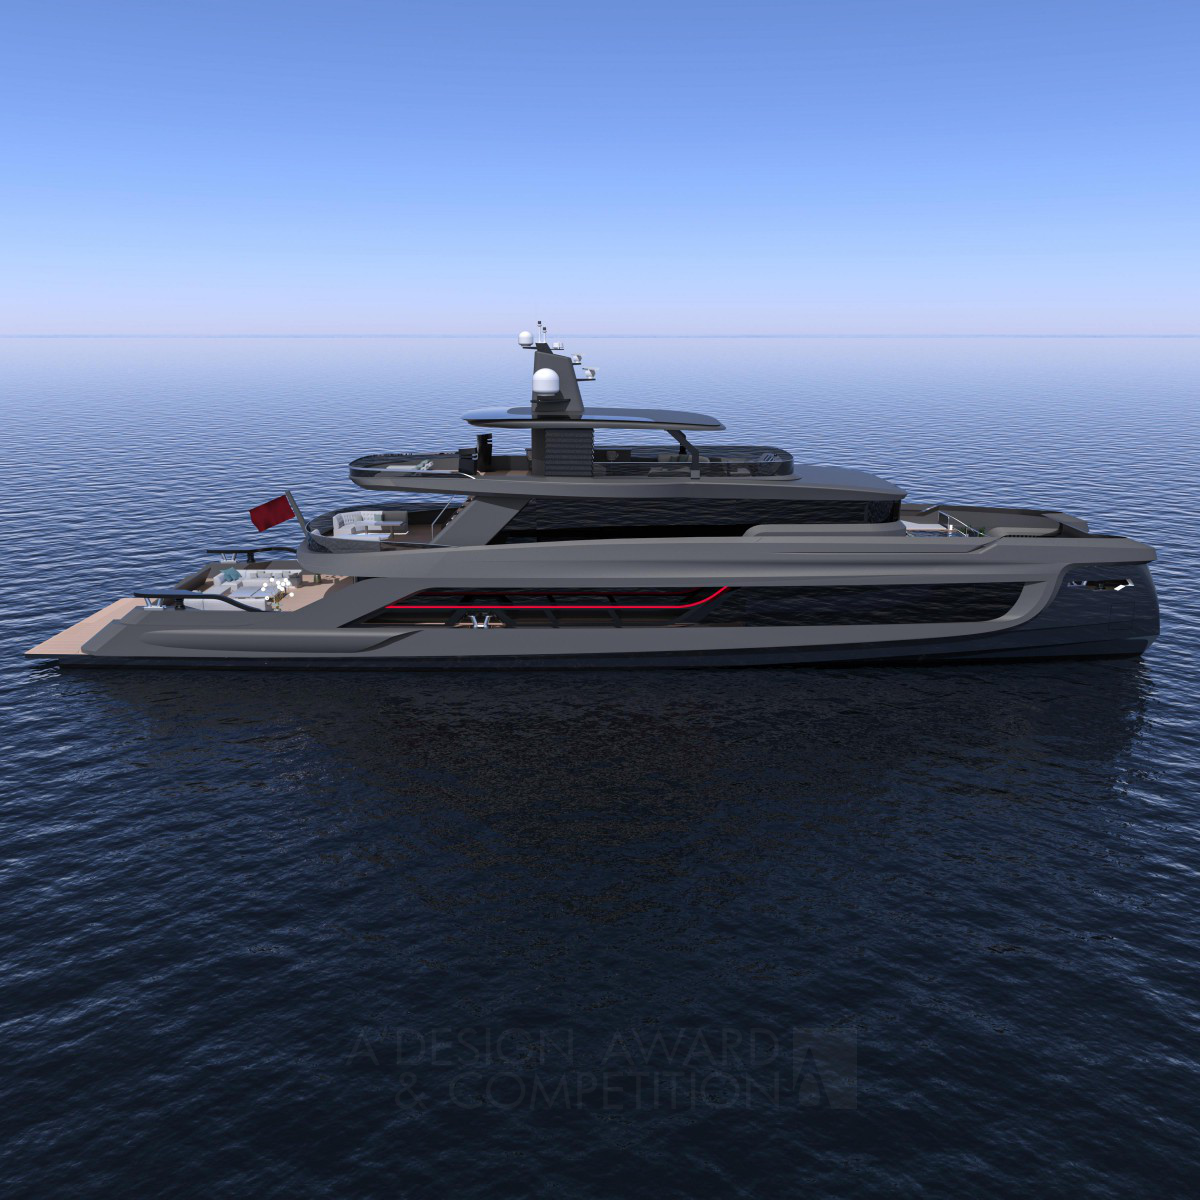 yacht design competition